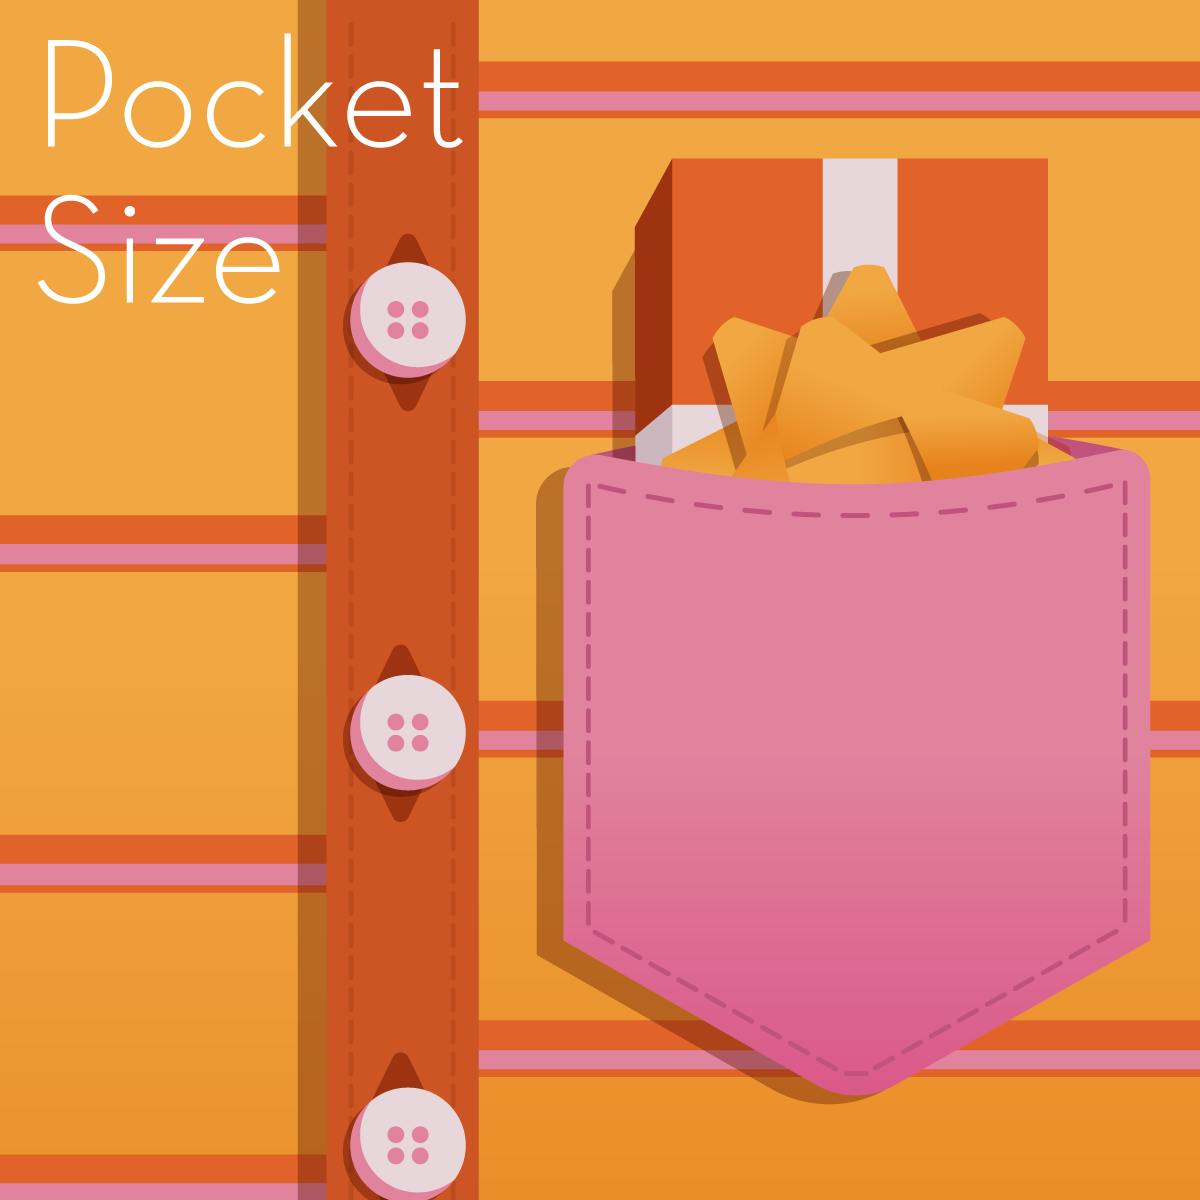 Ilustration of a gift guide containing practical pocket-sized gifts for men. Illustration shows a pink breast pocket containing a small gift, on an orange-striped shirt.